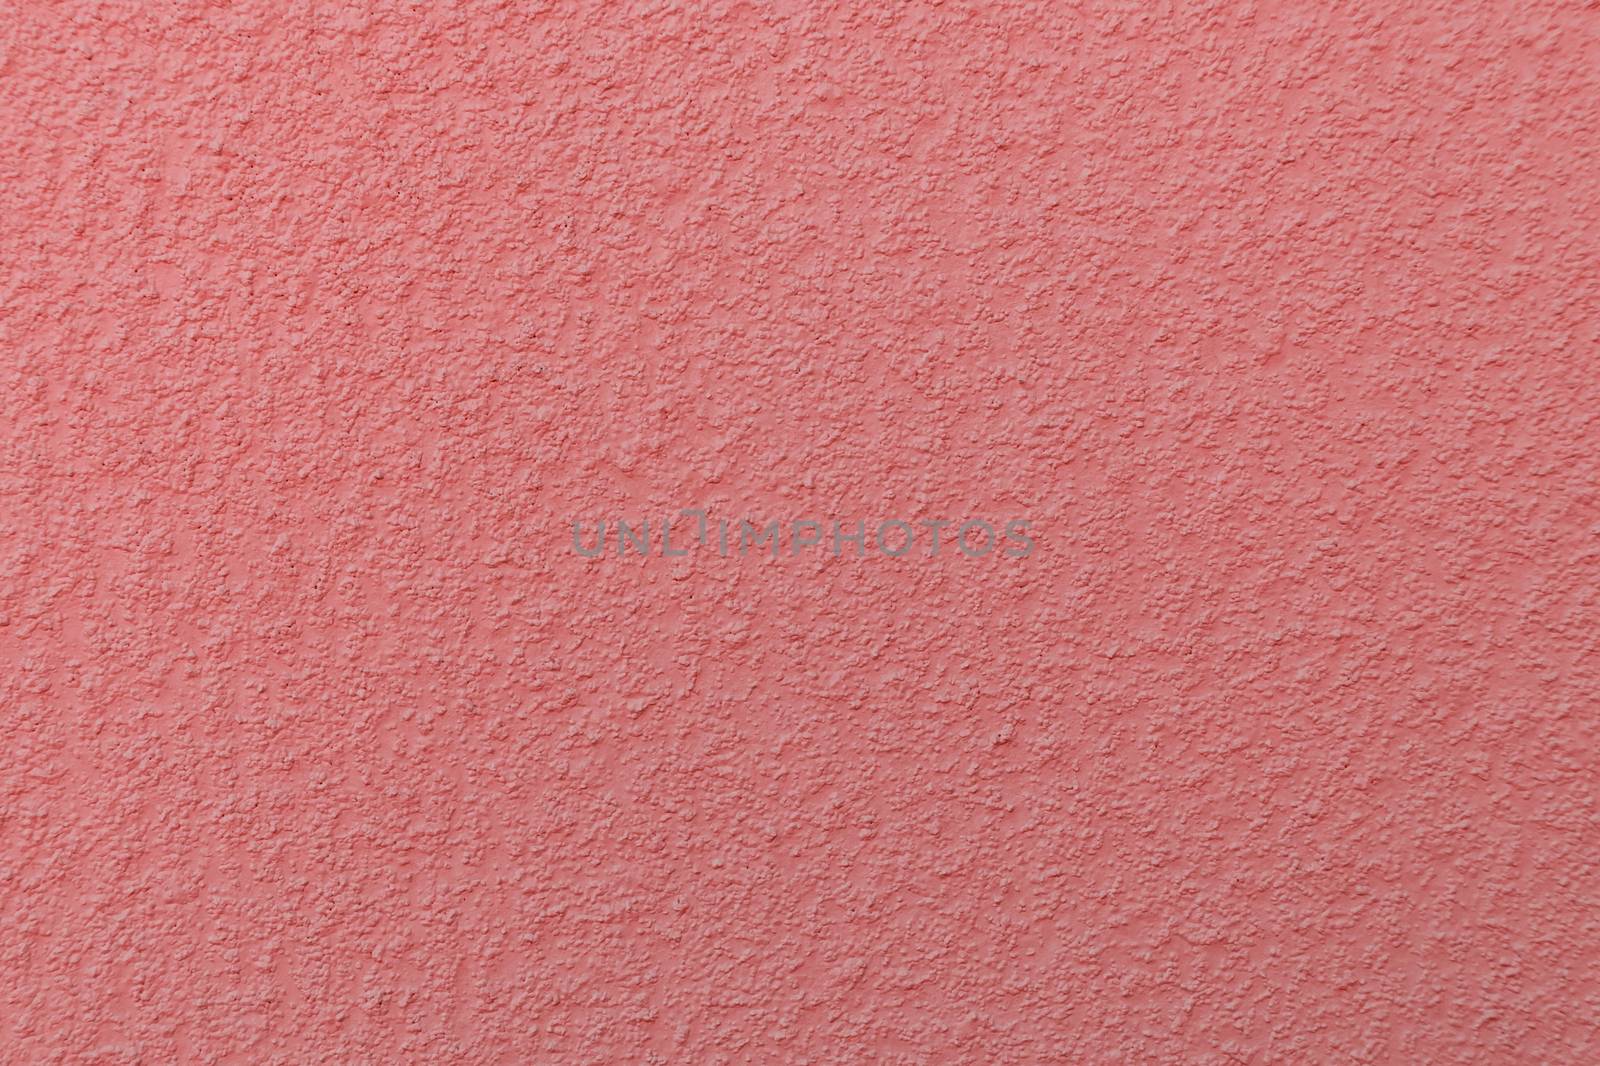 surface of the plastered wall painted in coral color-trendy color of 2019 year.